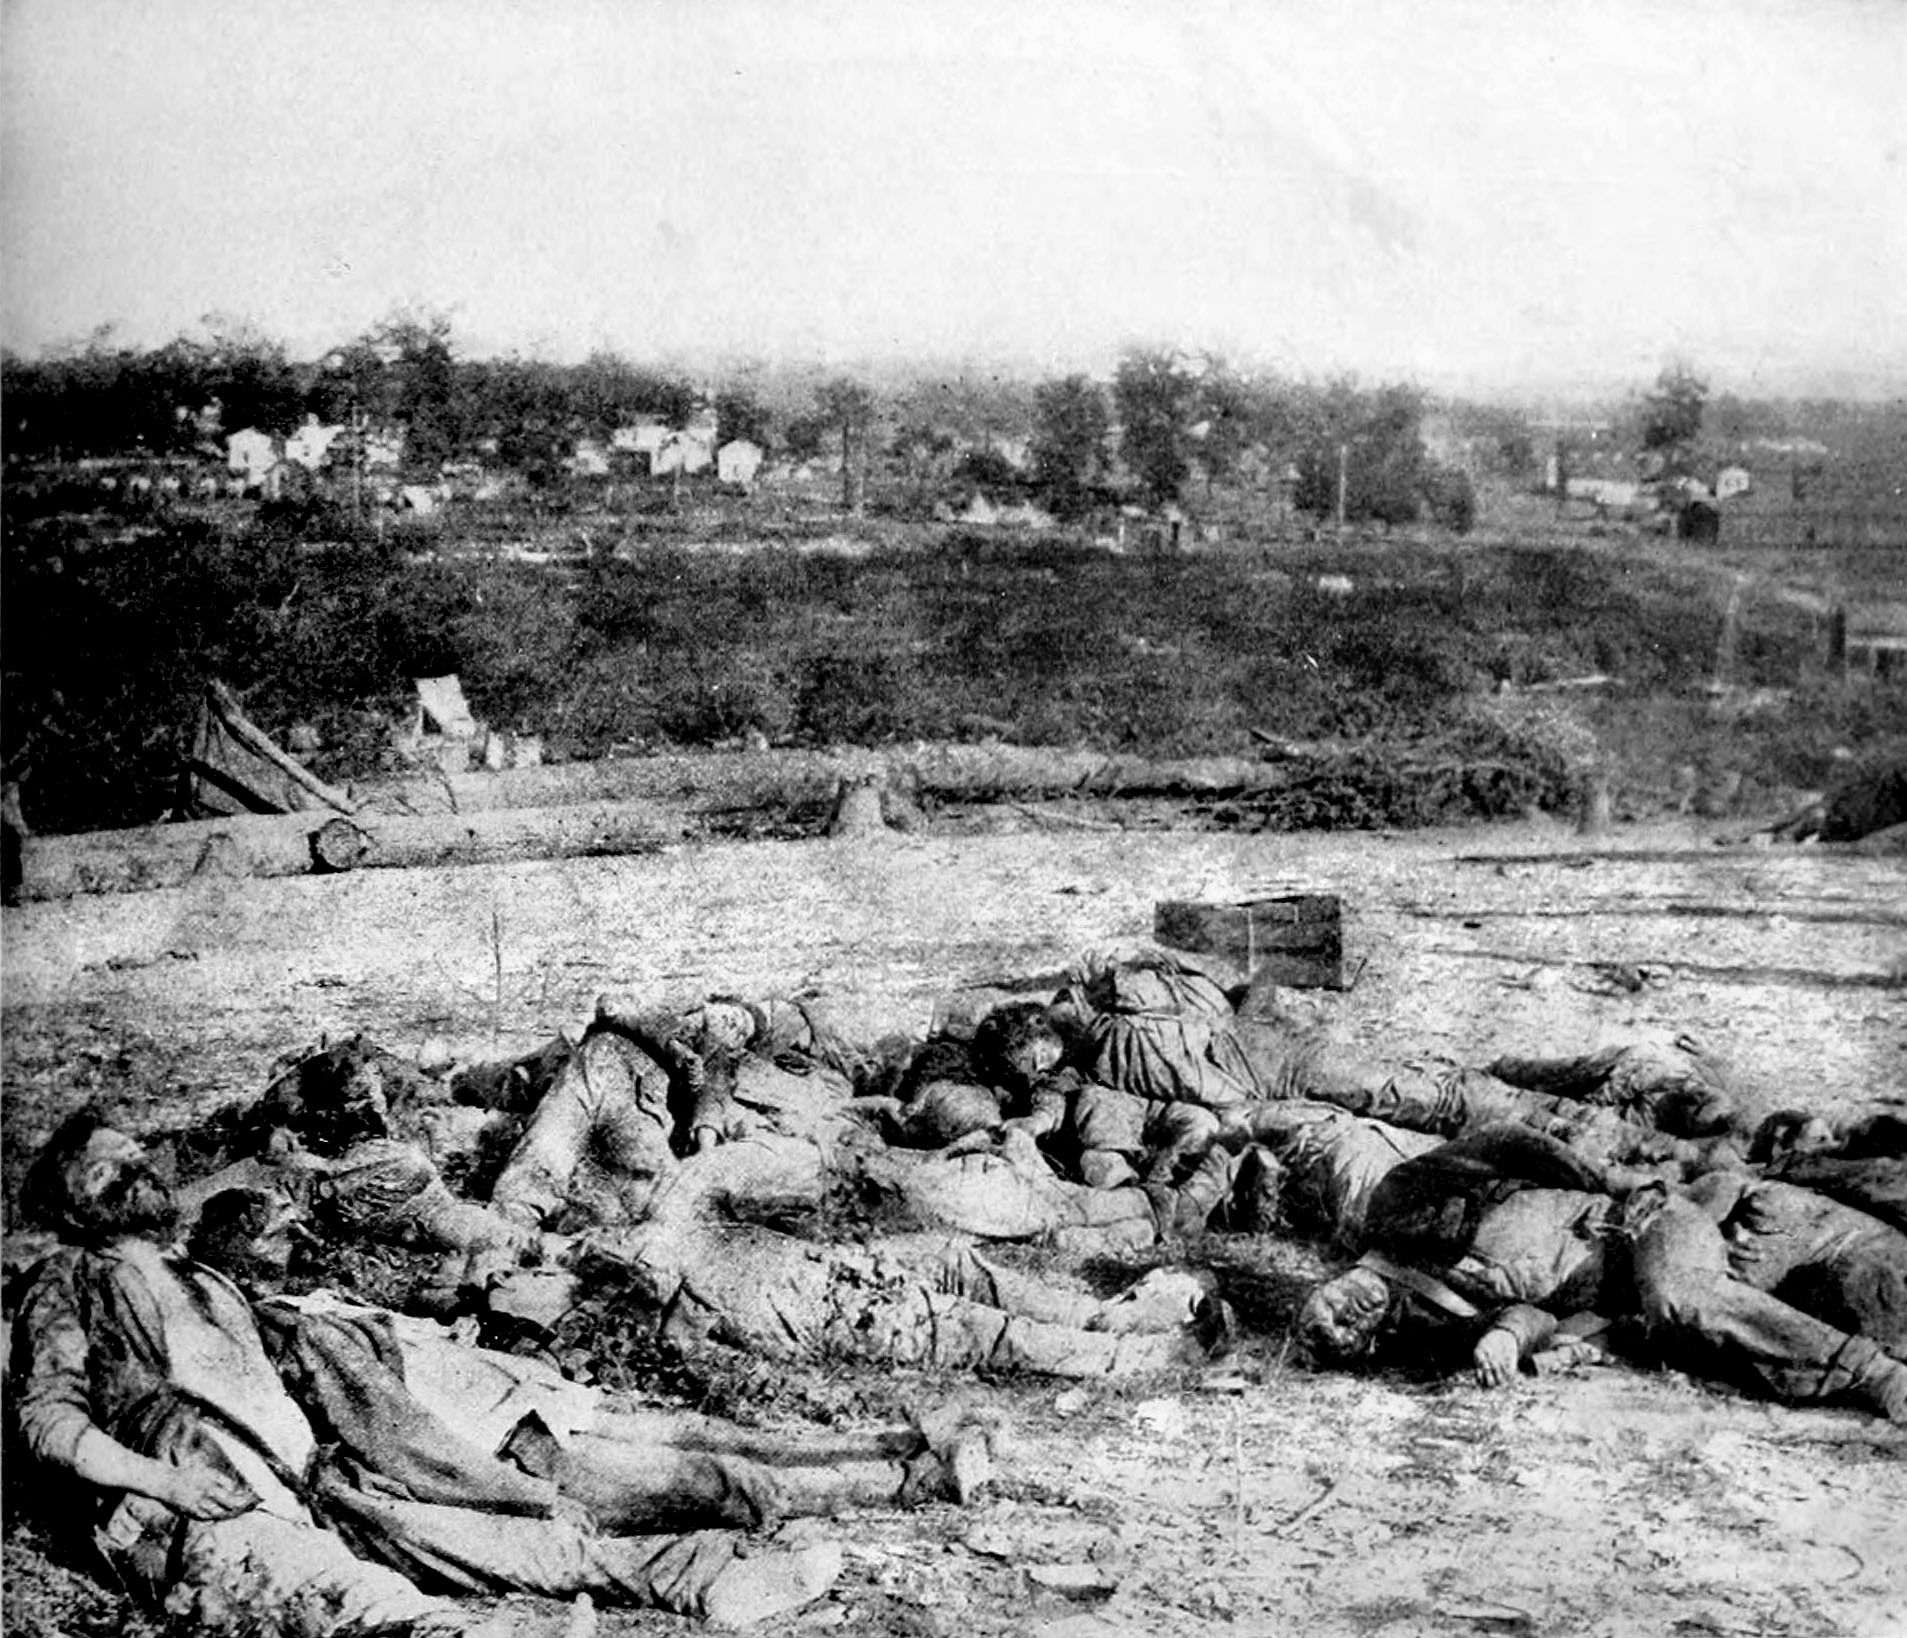 Confederate soldiers killed during the Battle of Corinth, Mississippi, October 3-4, 1862, by George Washington Armstead (1835-1912), a photographer from Columbus, Ohio, published in Miller's The Photographic History of the Civil War with a caption: “Before the Sod Hit Them.”